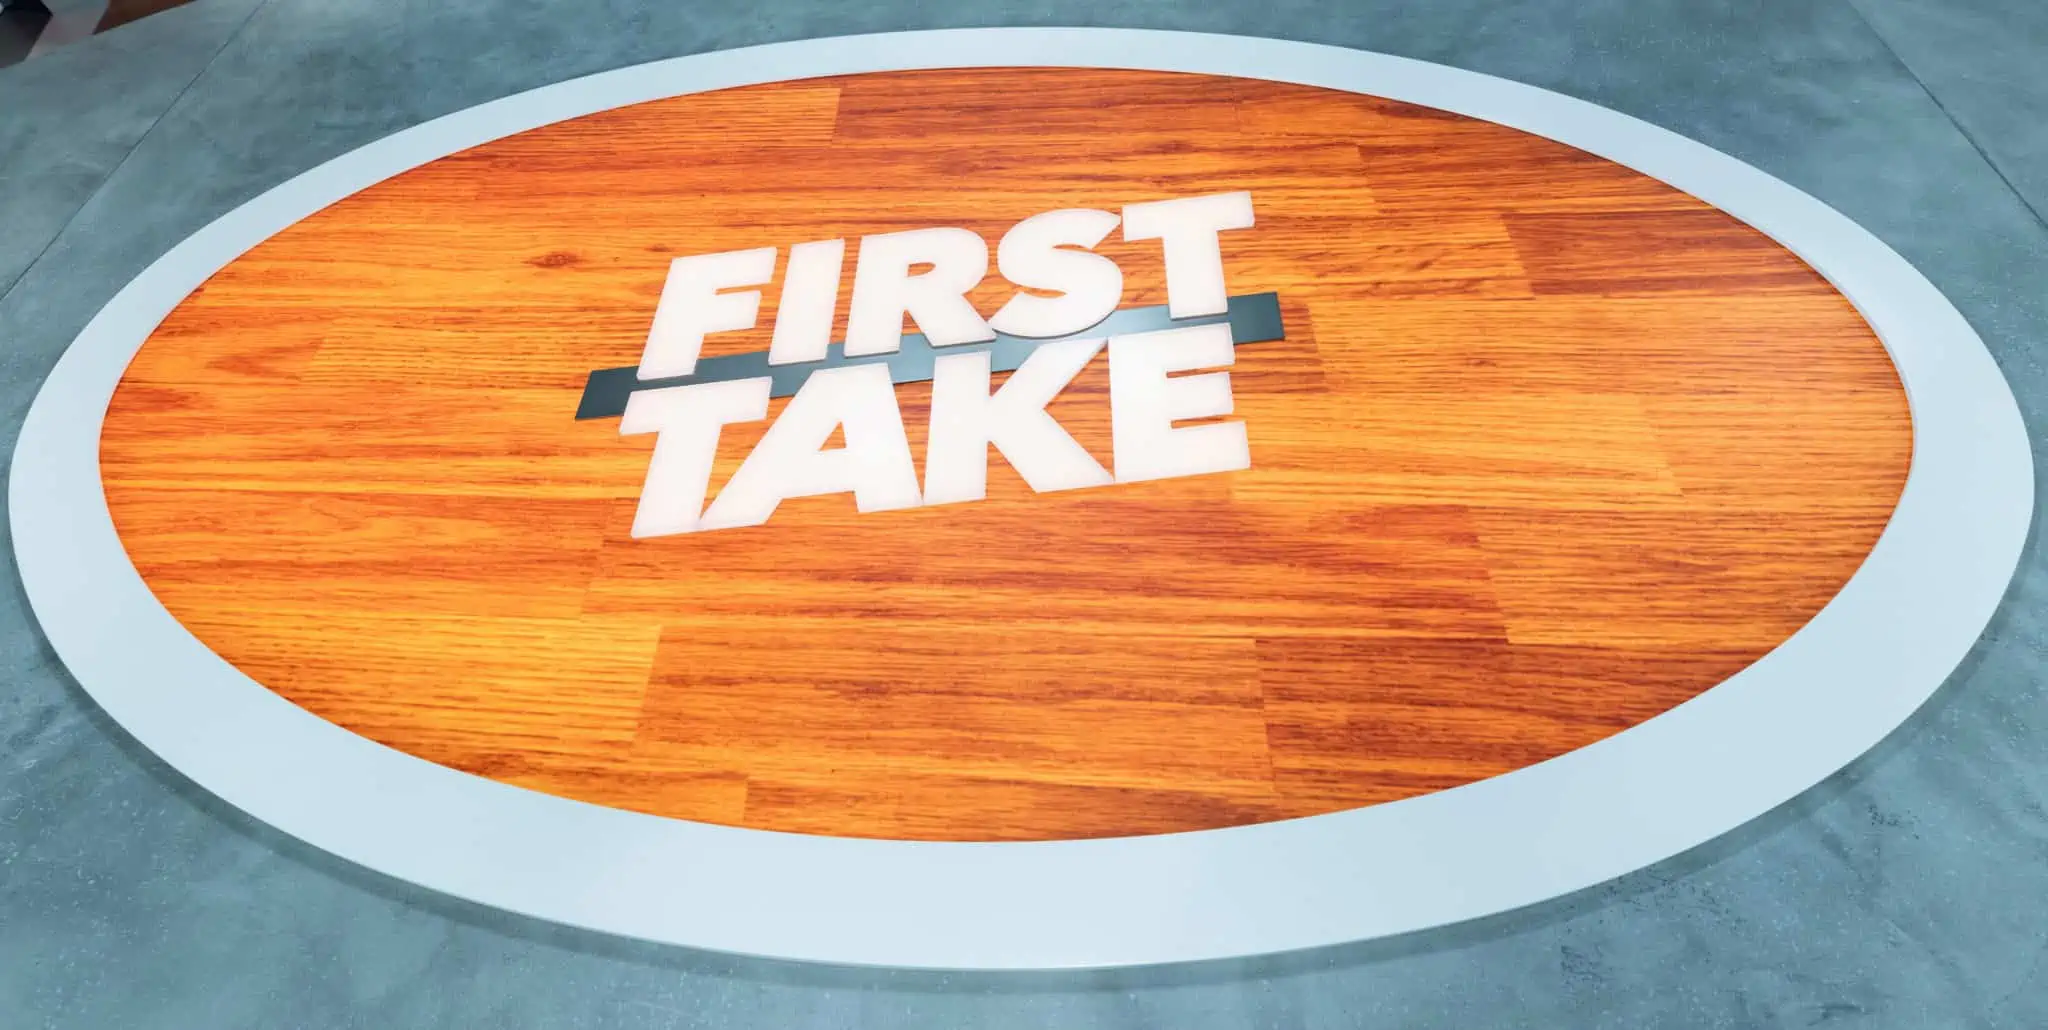 Where Can You Watch “First Take?”